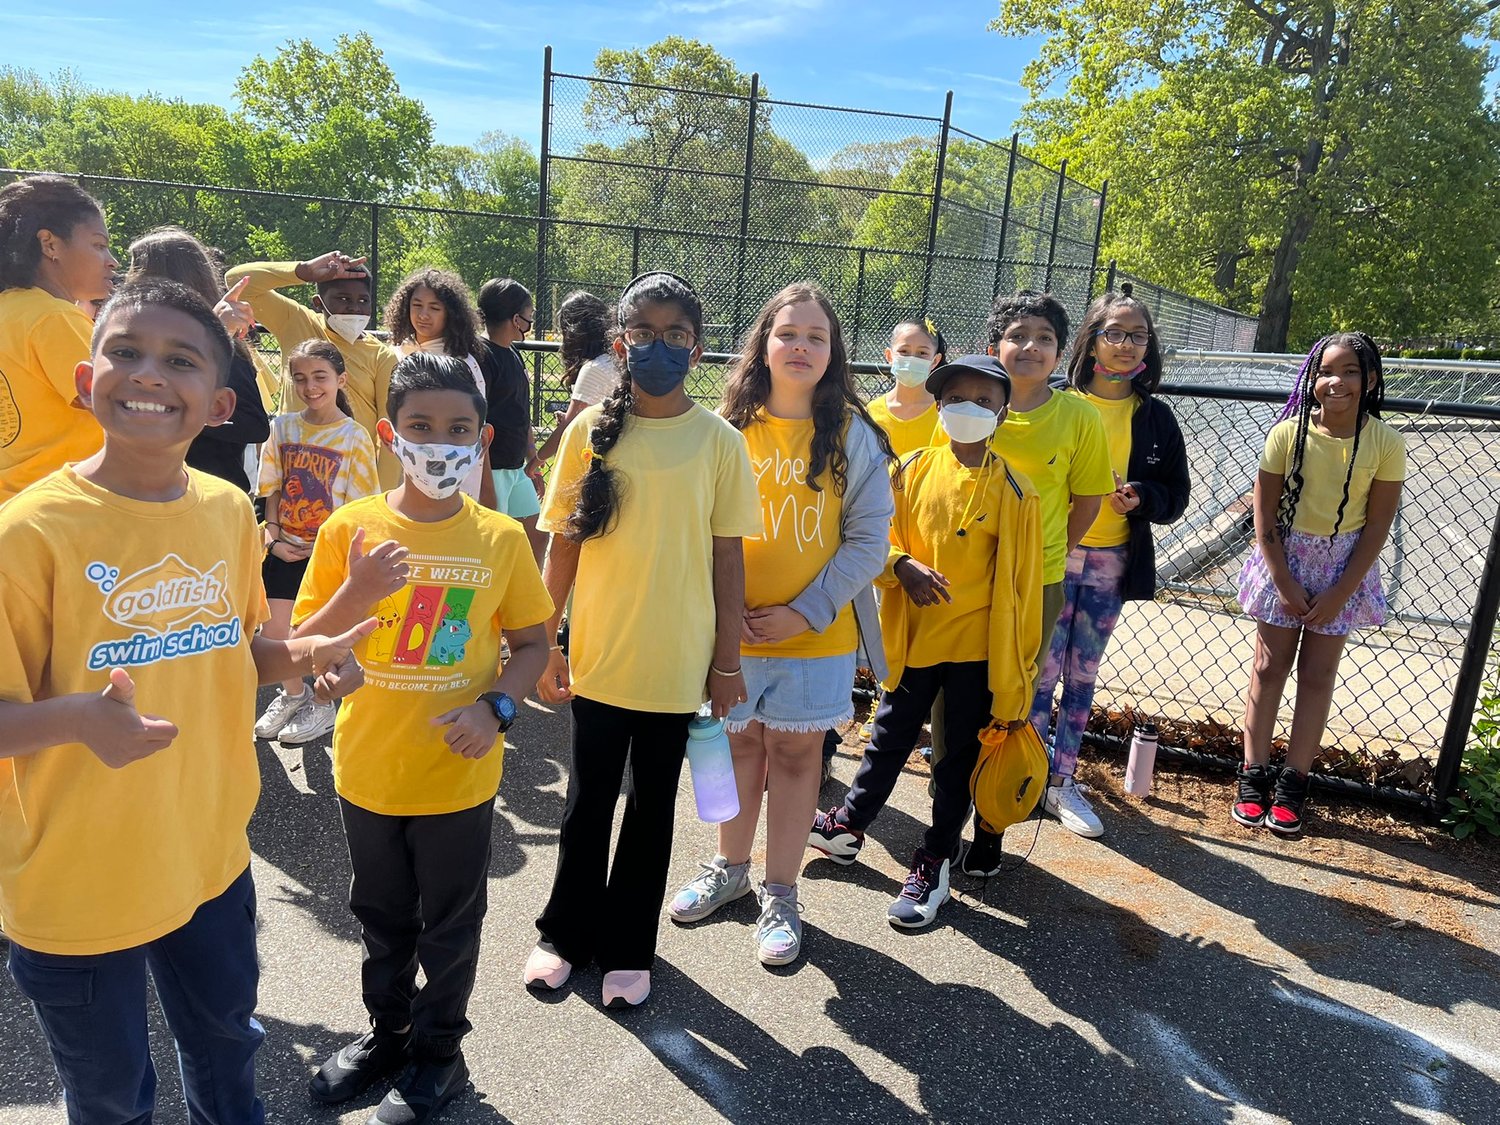 Howell Road Elementary School students enjoyed water games to cool down from the hot sun.